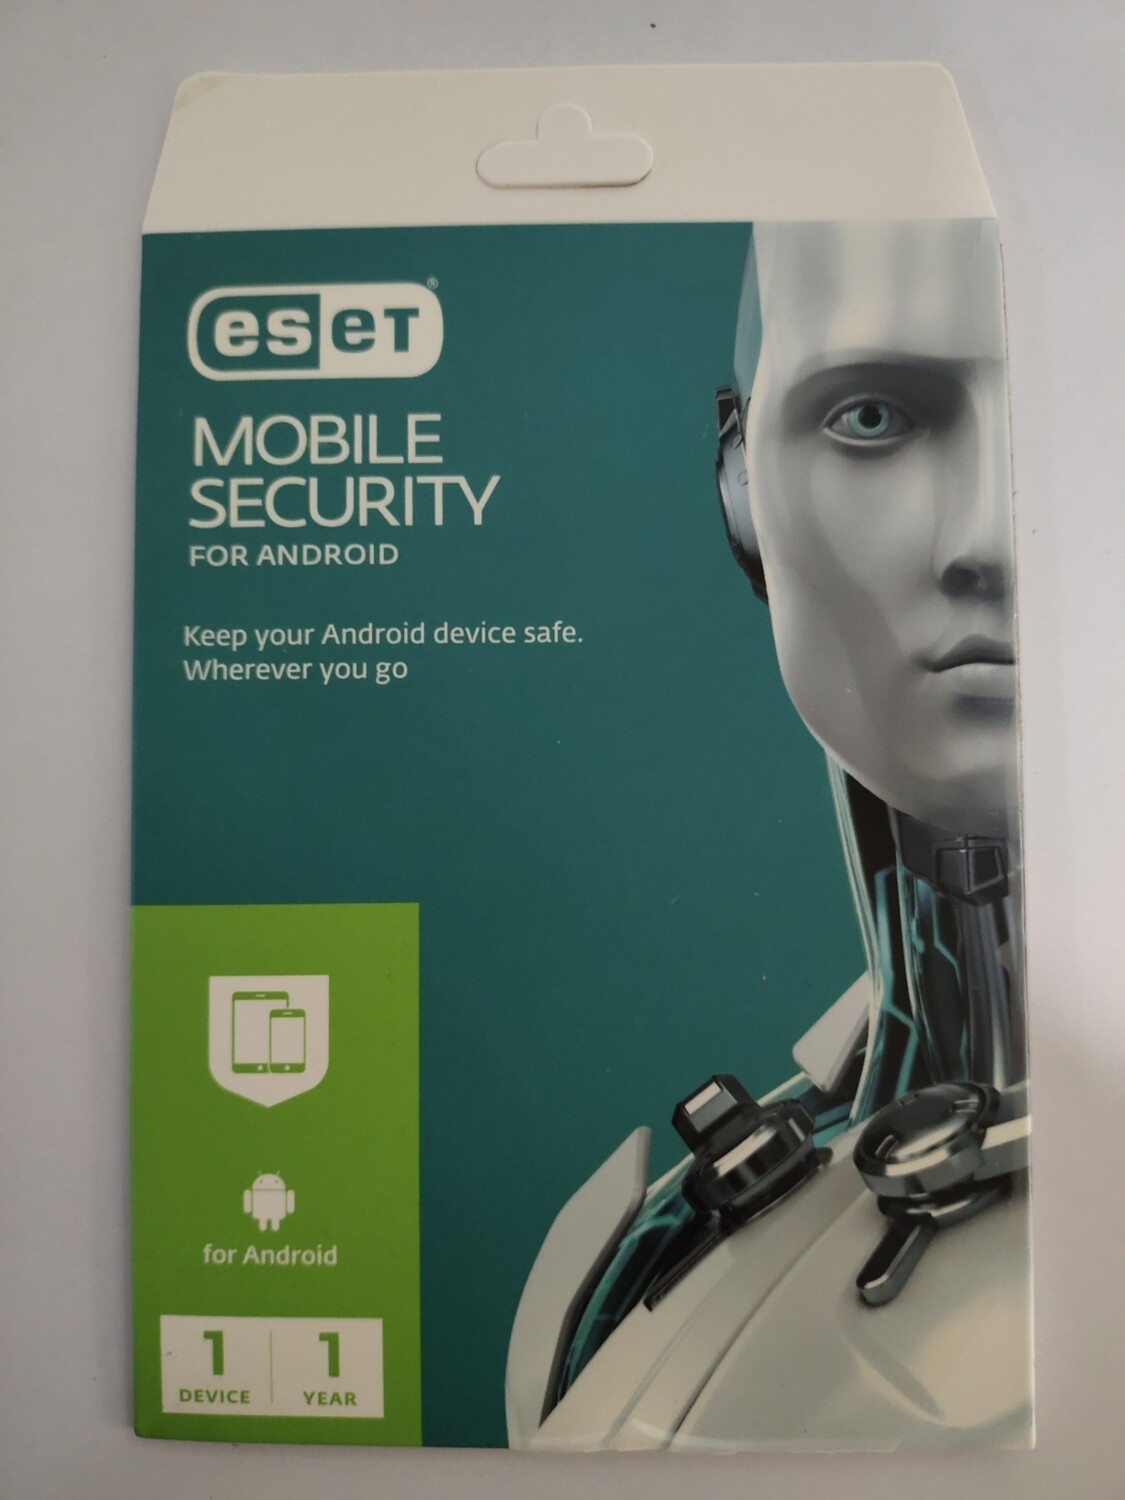 1 Device, 1 Year, Eset Mobile Security, For Android